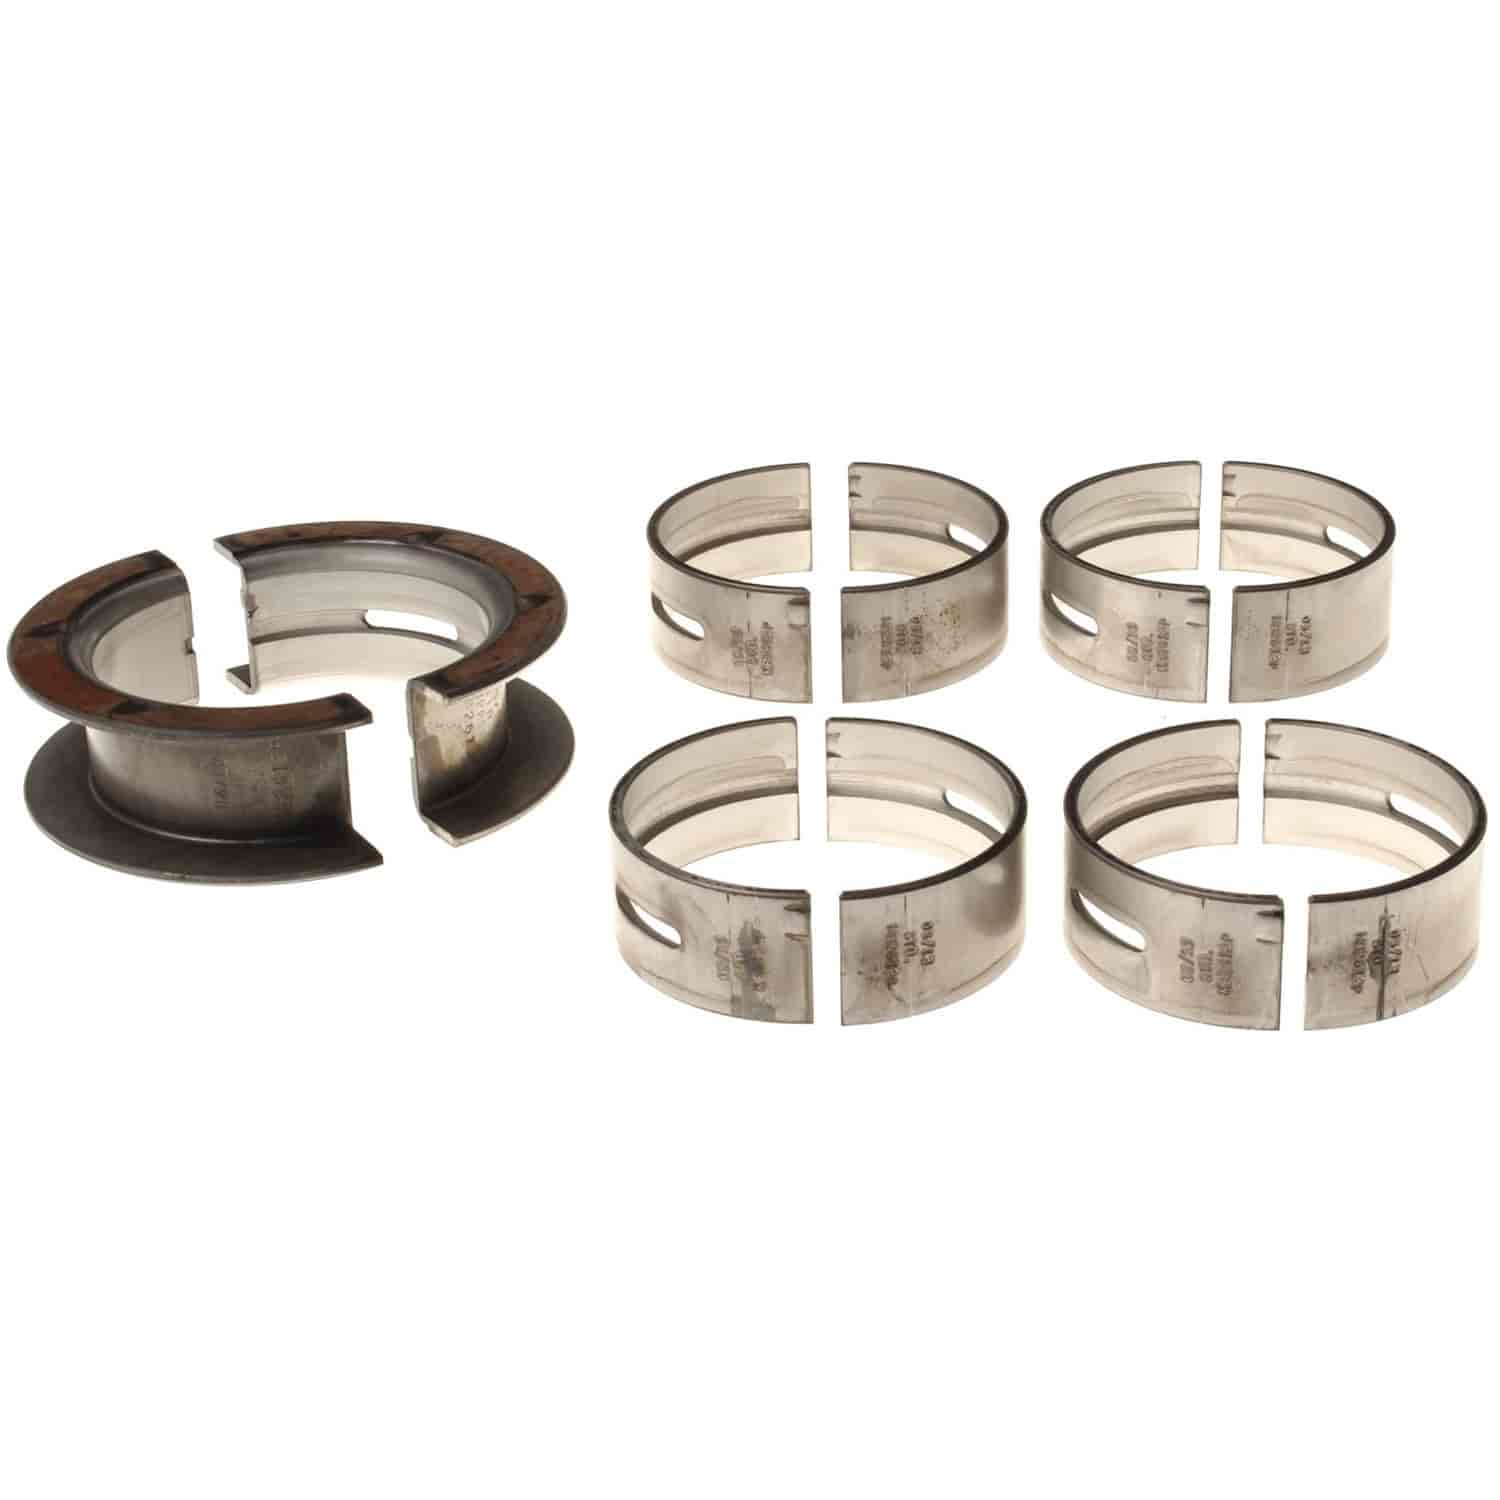 Main Bearing Set Ford 1974-1997 L4 2.0/2.3L with